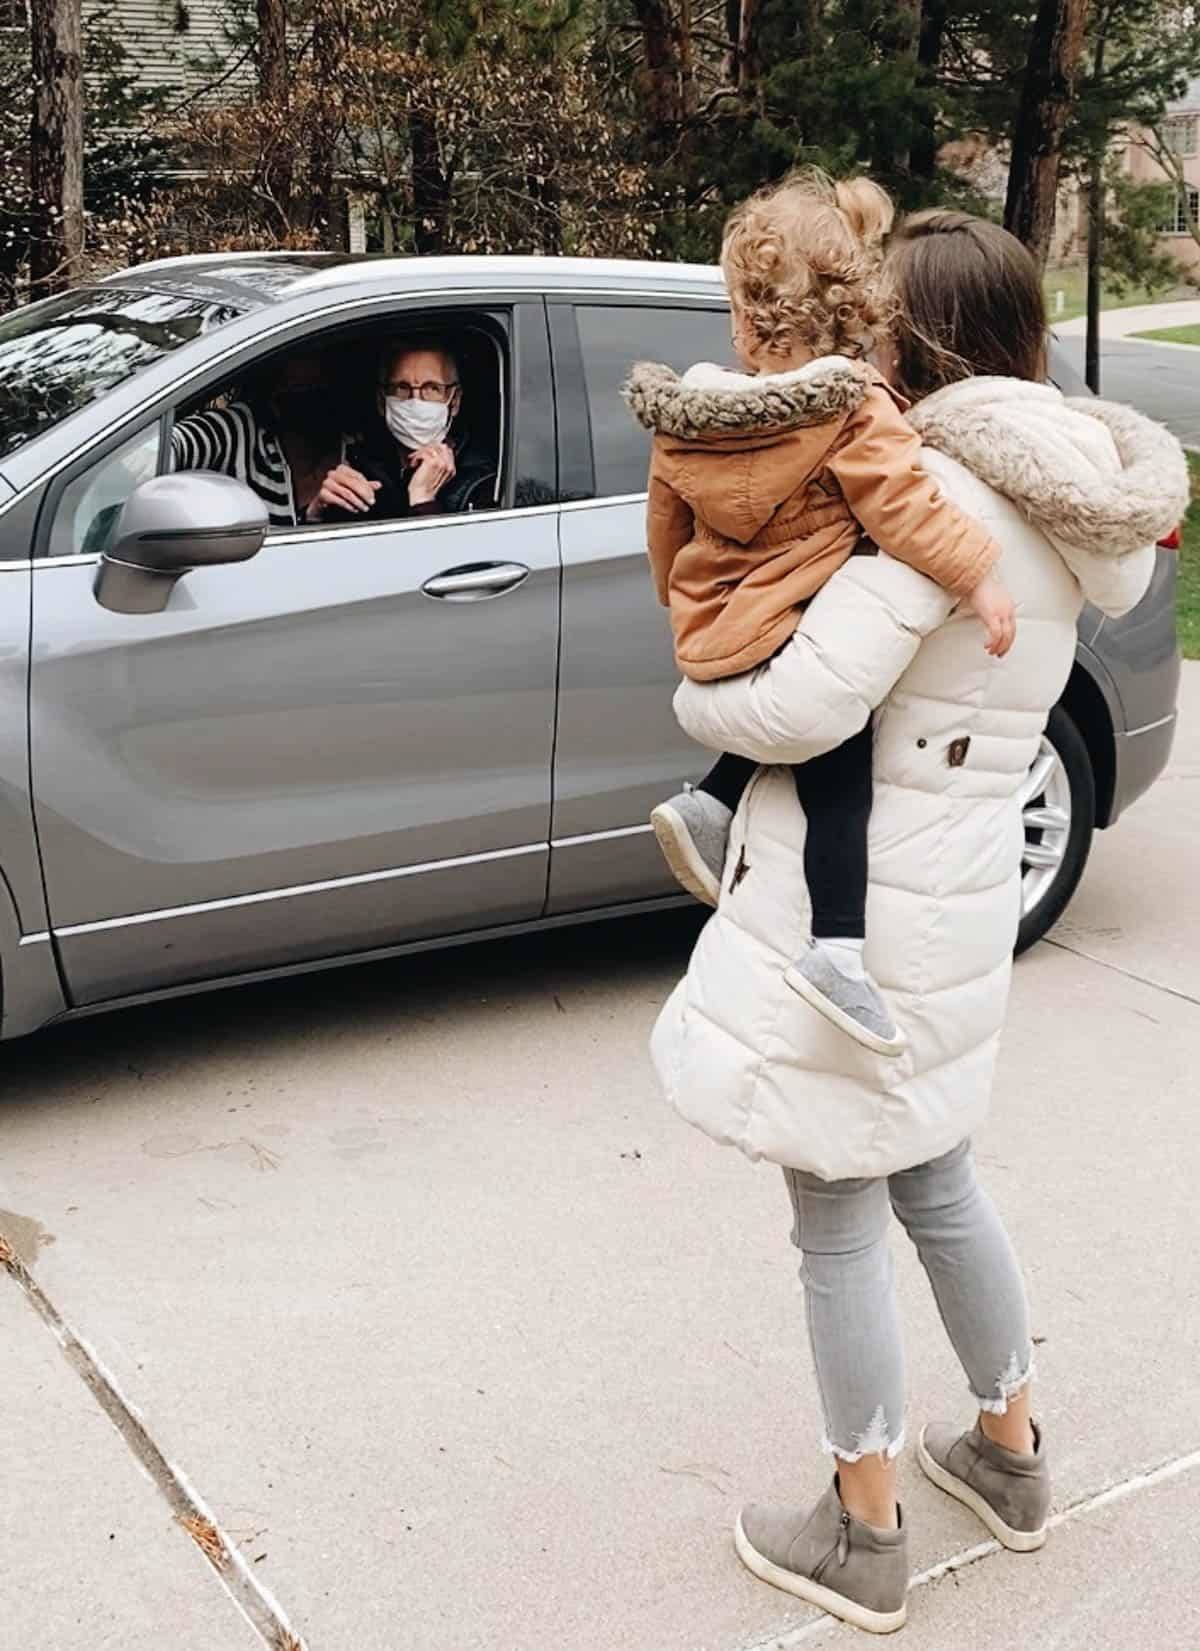 A woman holding a child on her hip as she talks to someone in a grey car.